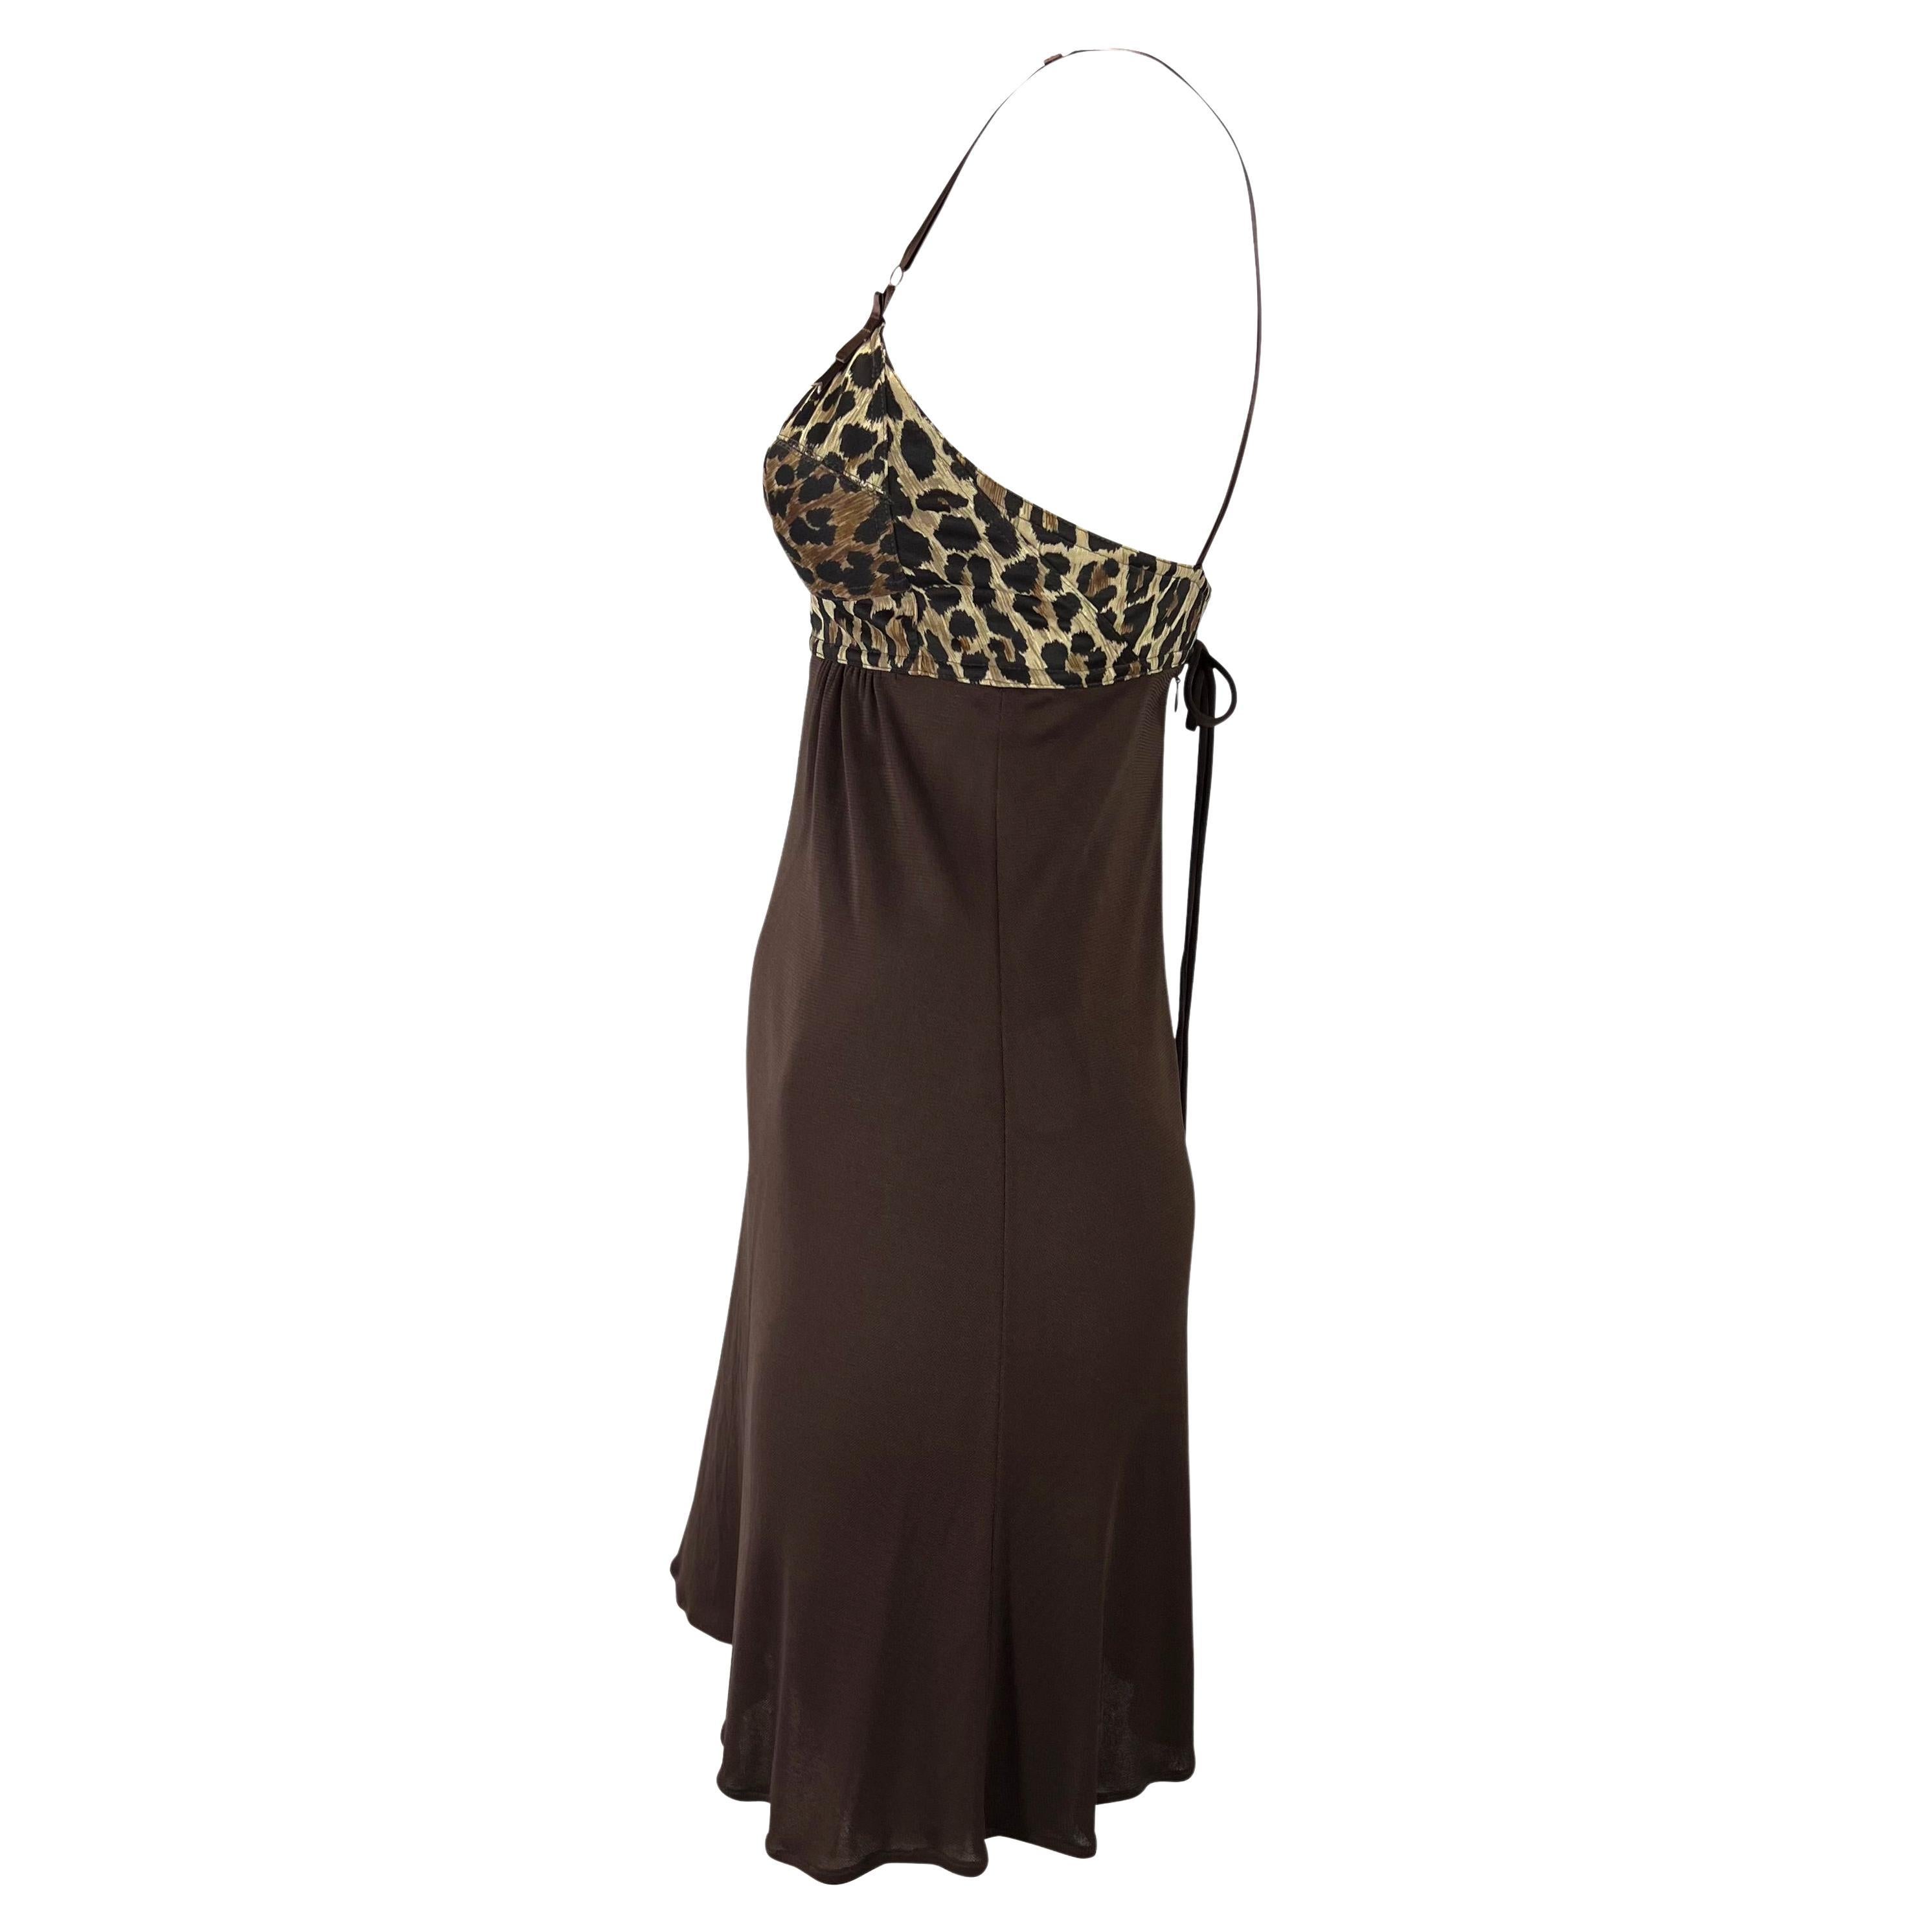 S/S 1997 Dolce & Gabbana SJP Cheetah Print Sheer Brown Bustier Slip Dress In Good Condition For Sale In West Hollywood, CA